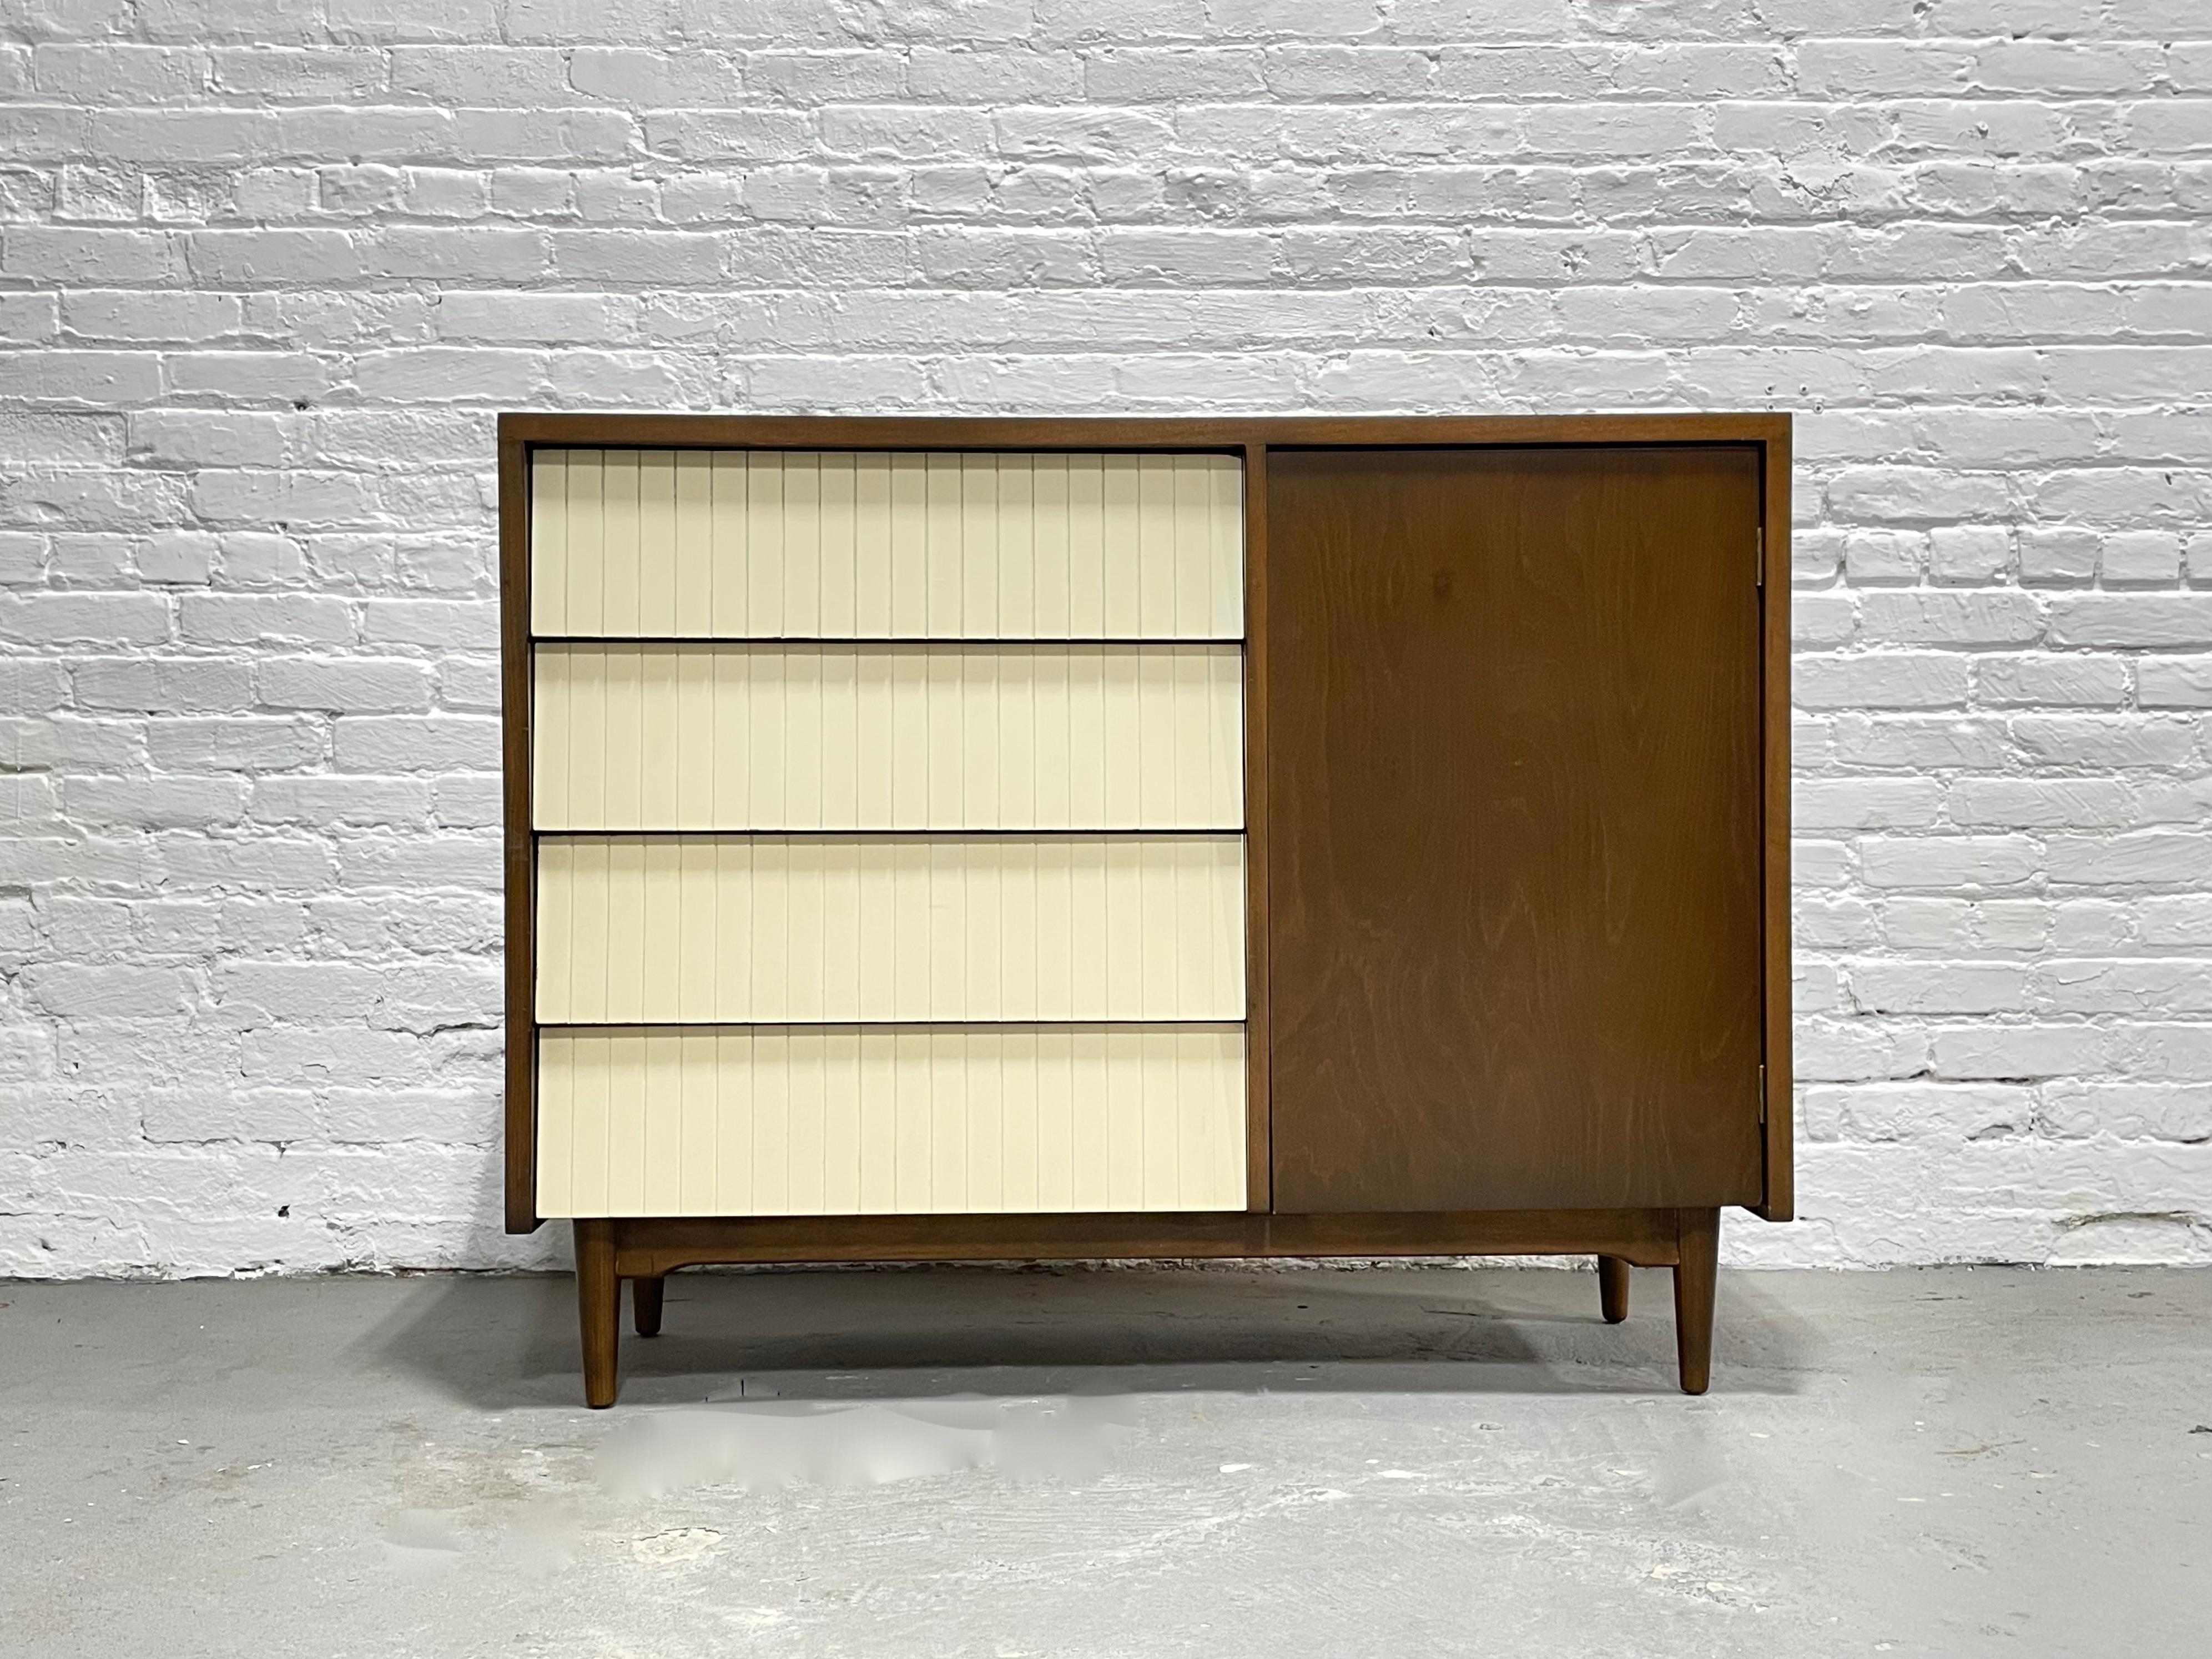 Mid Century Modern Walnut + White Gentlemen's Chest / dresser by Lawrence Peabody for Child Craft, c. 1960's. This lovely piece offers all the clothing storage you will need in one streamlined piece.  One side offers 4 deep and spacious white